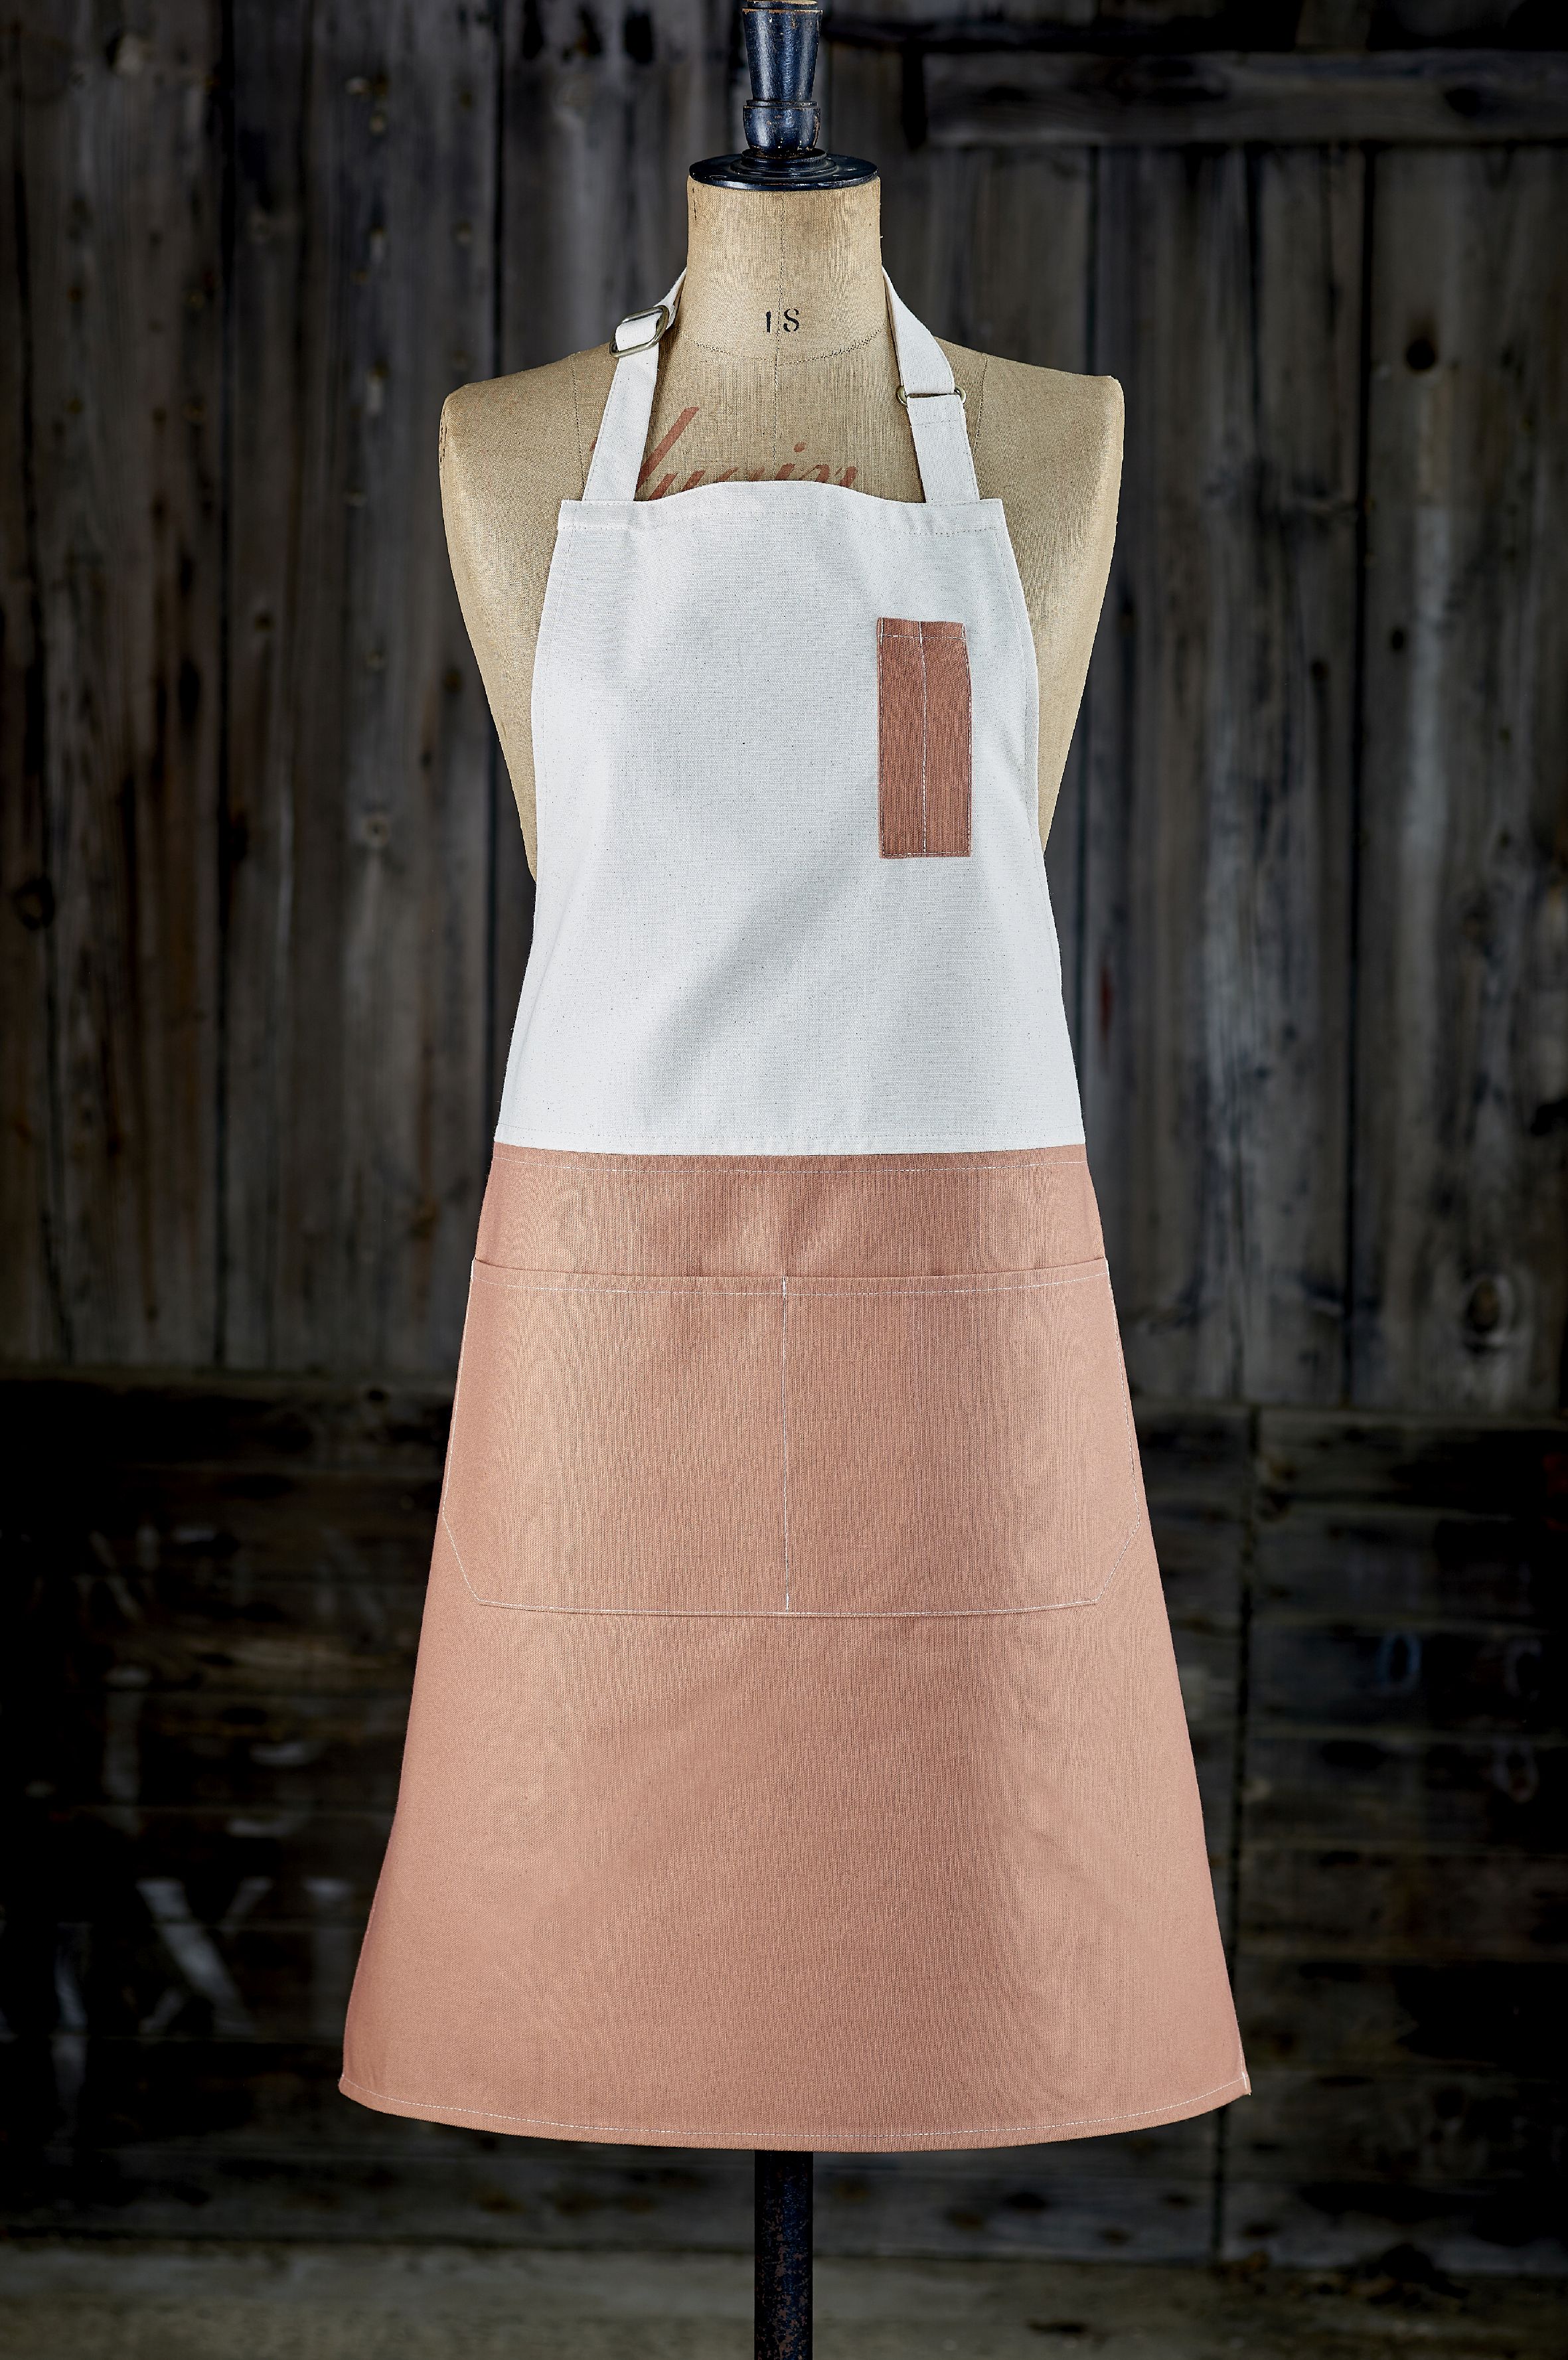 Organic Canvas Apron designed by Cotton Roots